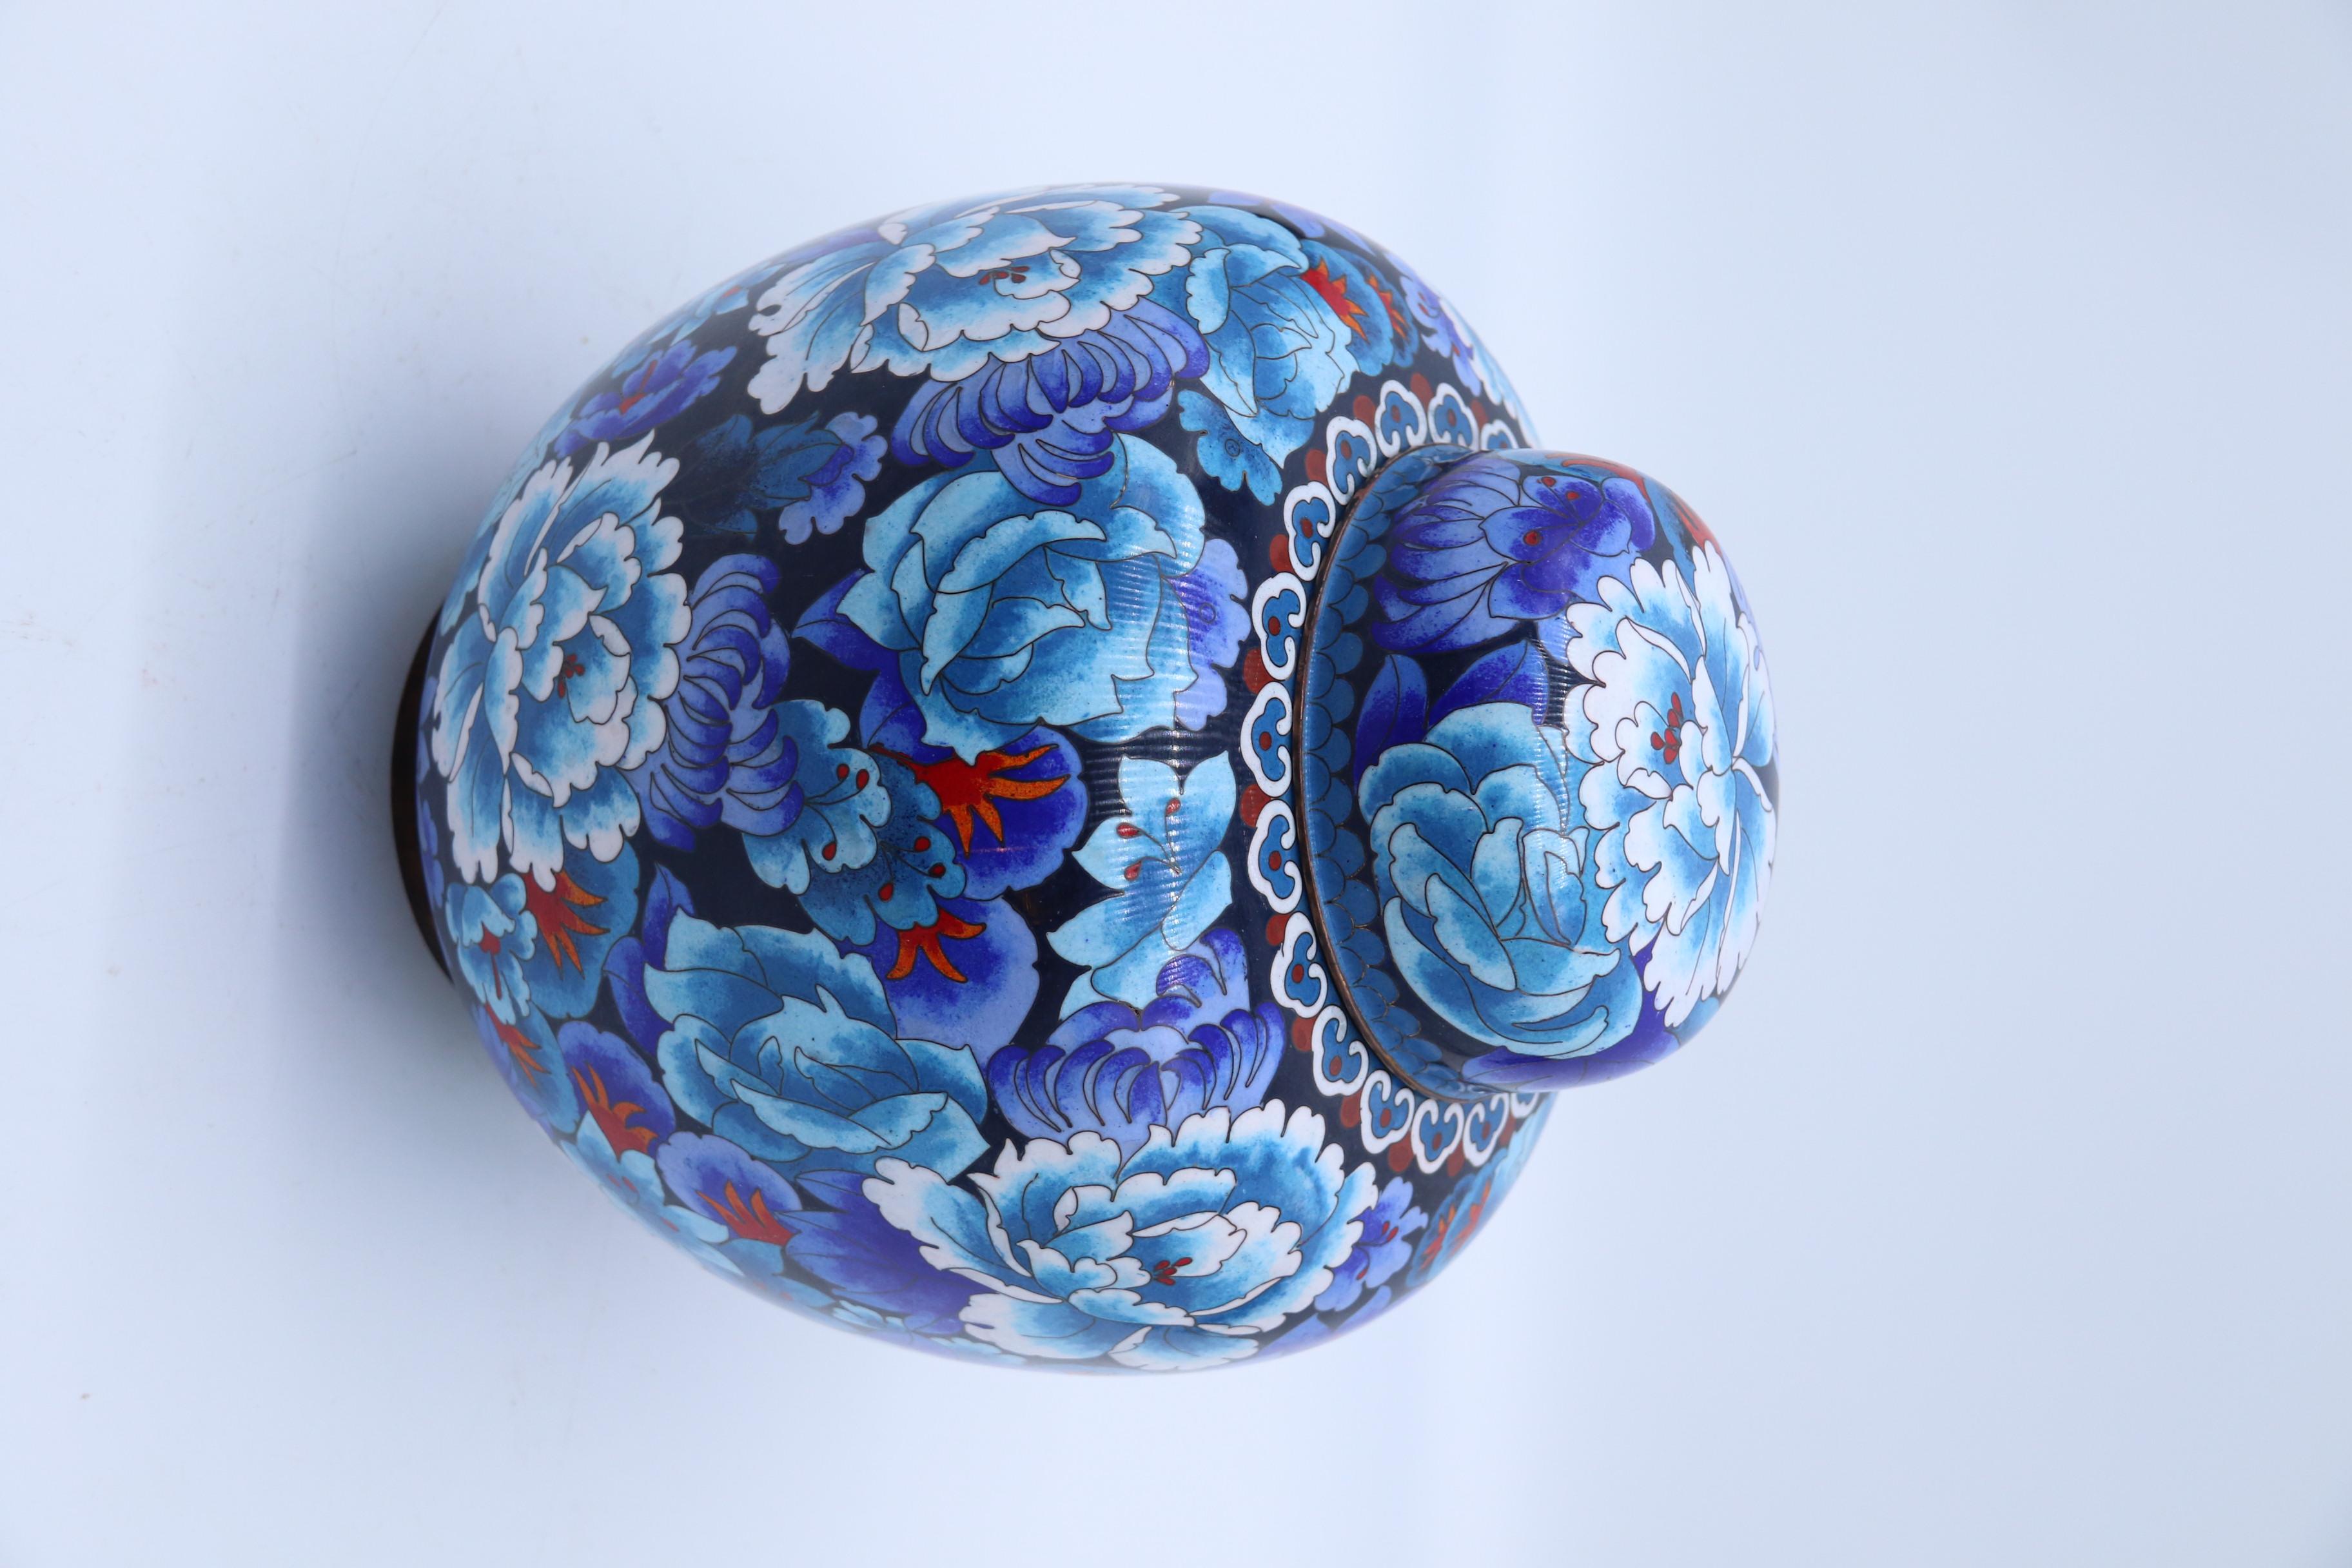 Ceramic Chinese Large Cloisonné Ginger Jar Enamelled with Peonies, c 1930